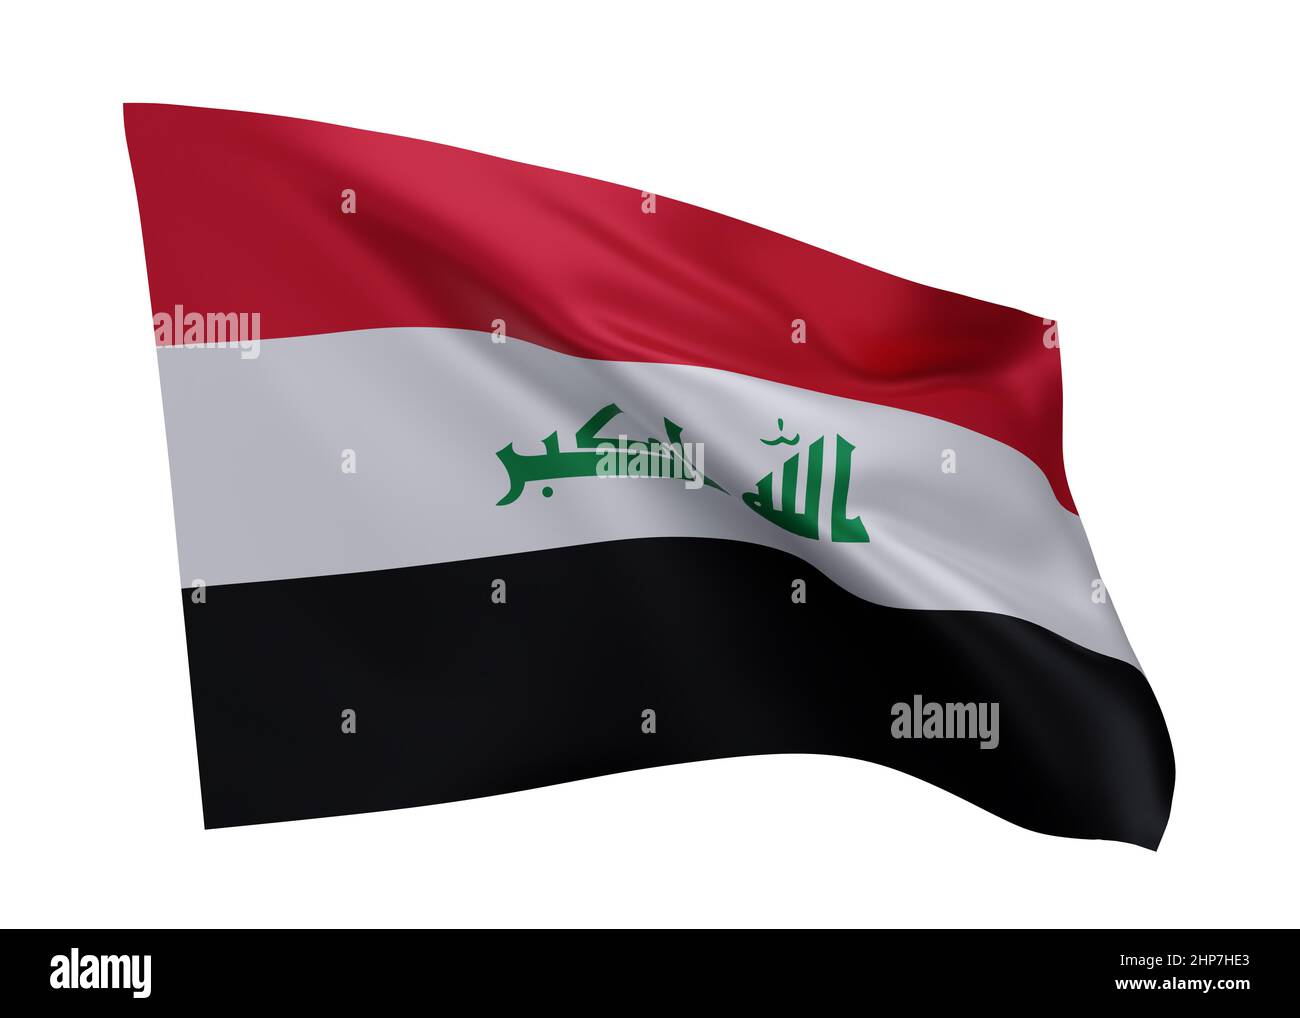 3d illustration flag of Iraq. Iraqi high resolution flag isolated against white background. 3d rendering Stock Photo